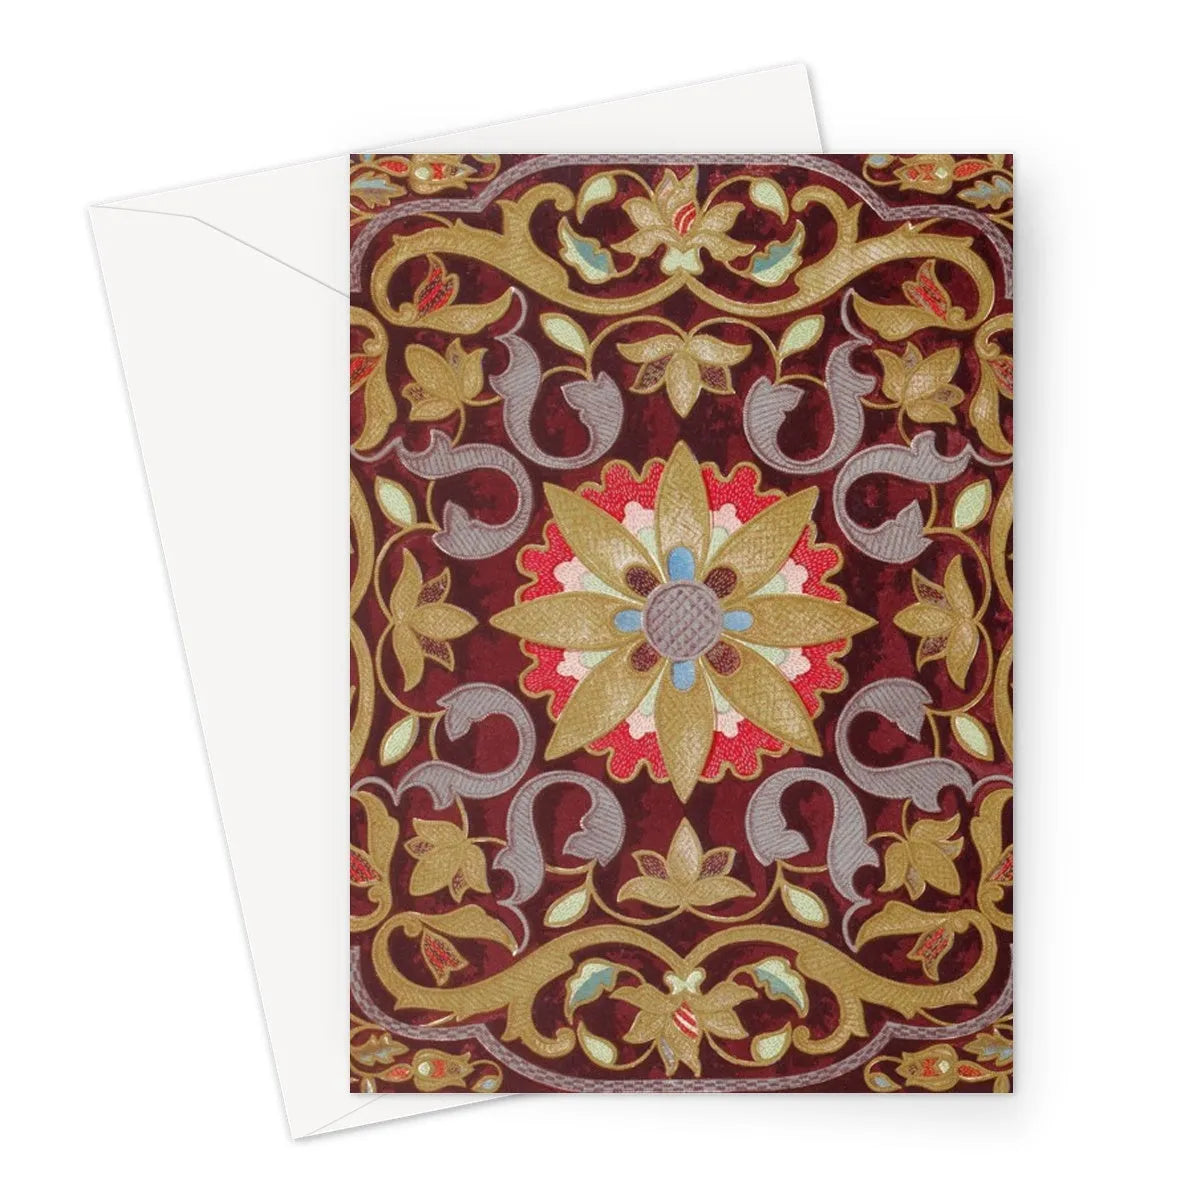 Russian Embroidery Greeting Card - A5 Portrait / 1 Card - Greeting & Note Cards - Aesthetic Art